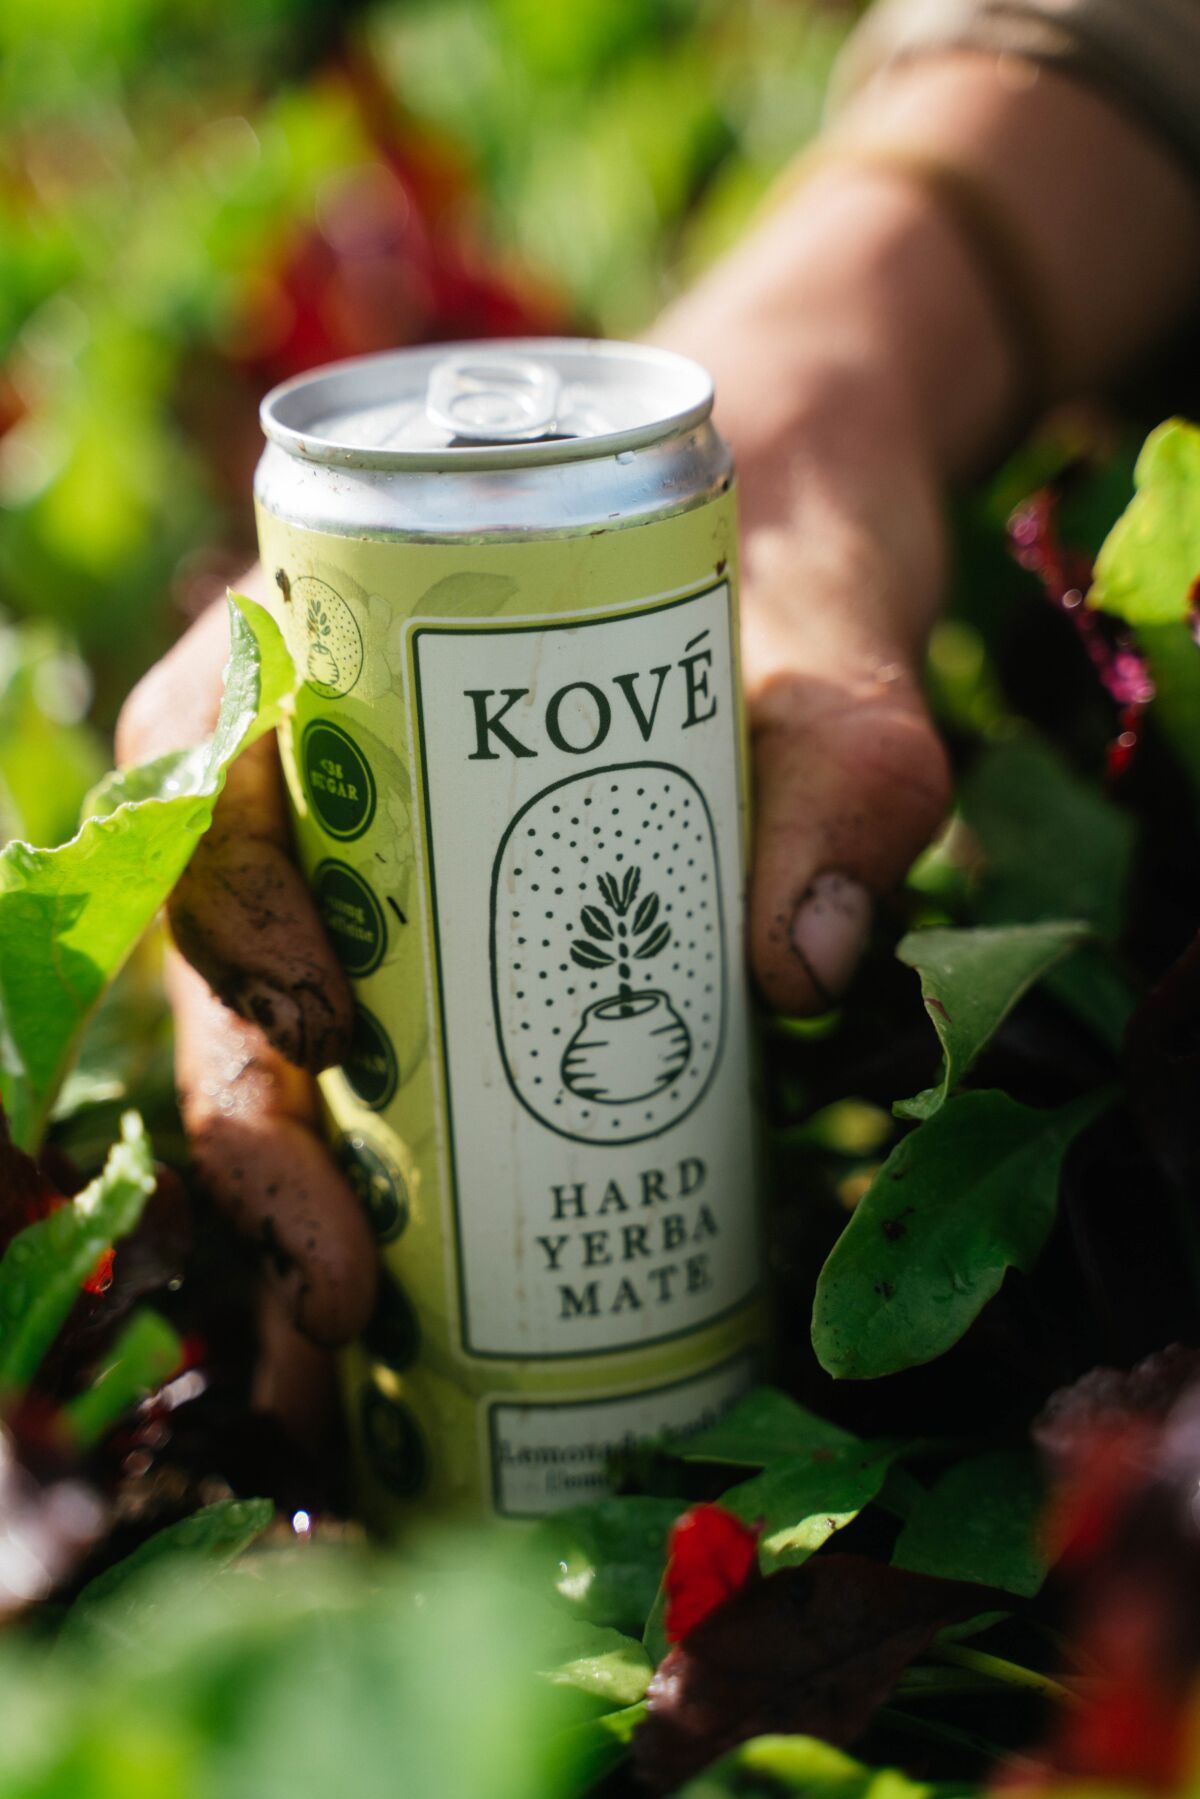 Kové Hard Yerba Mate is brewed and canned in Barrio Logan.